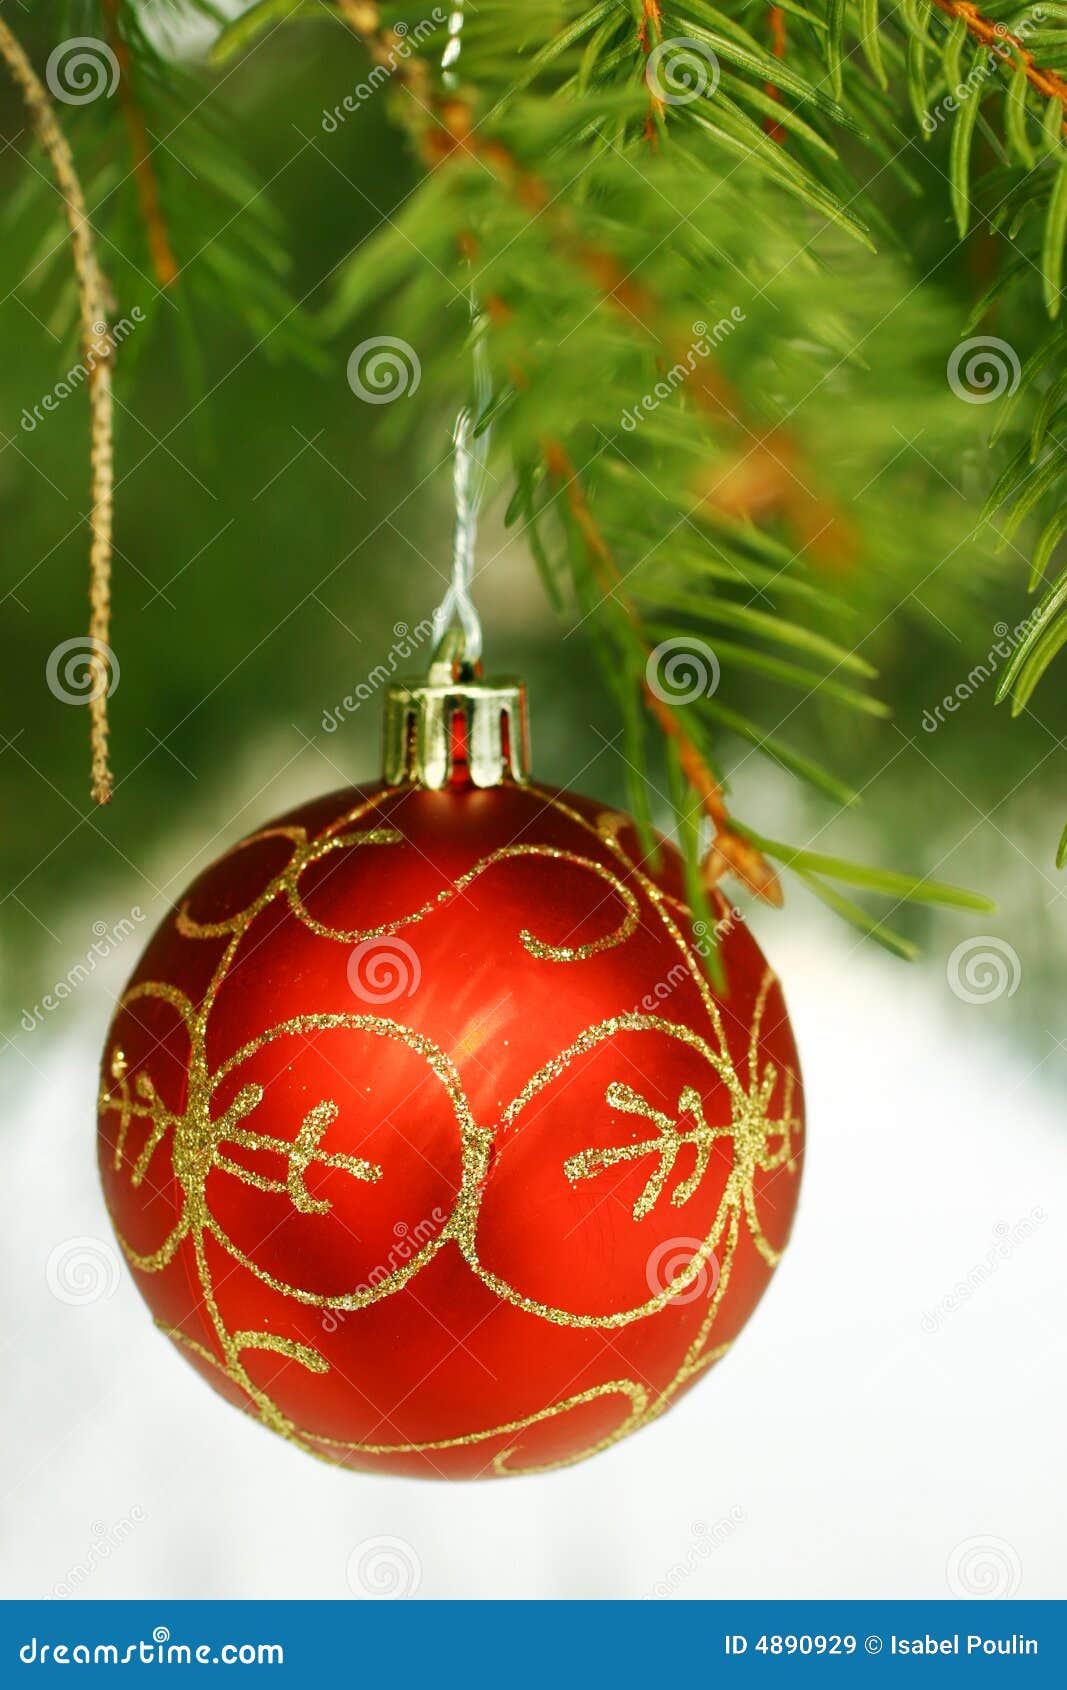 Red Christmas bauble stock image. Image of sphere, ornament - 4890929